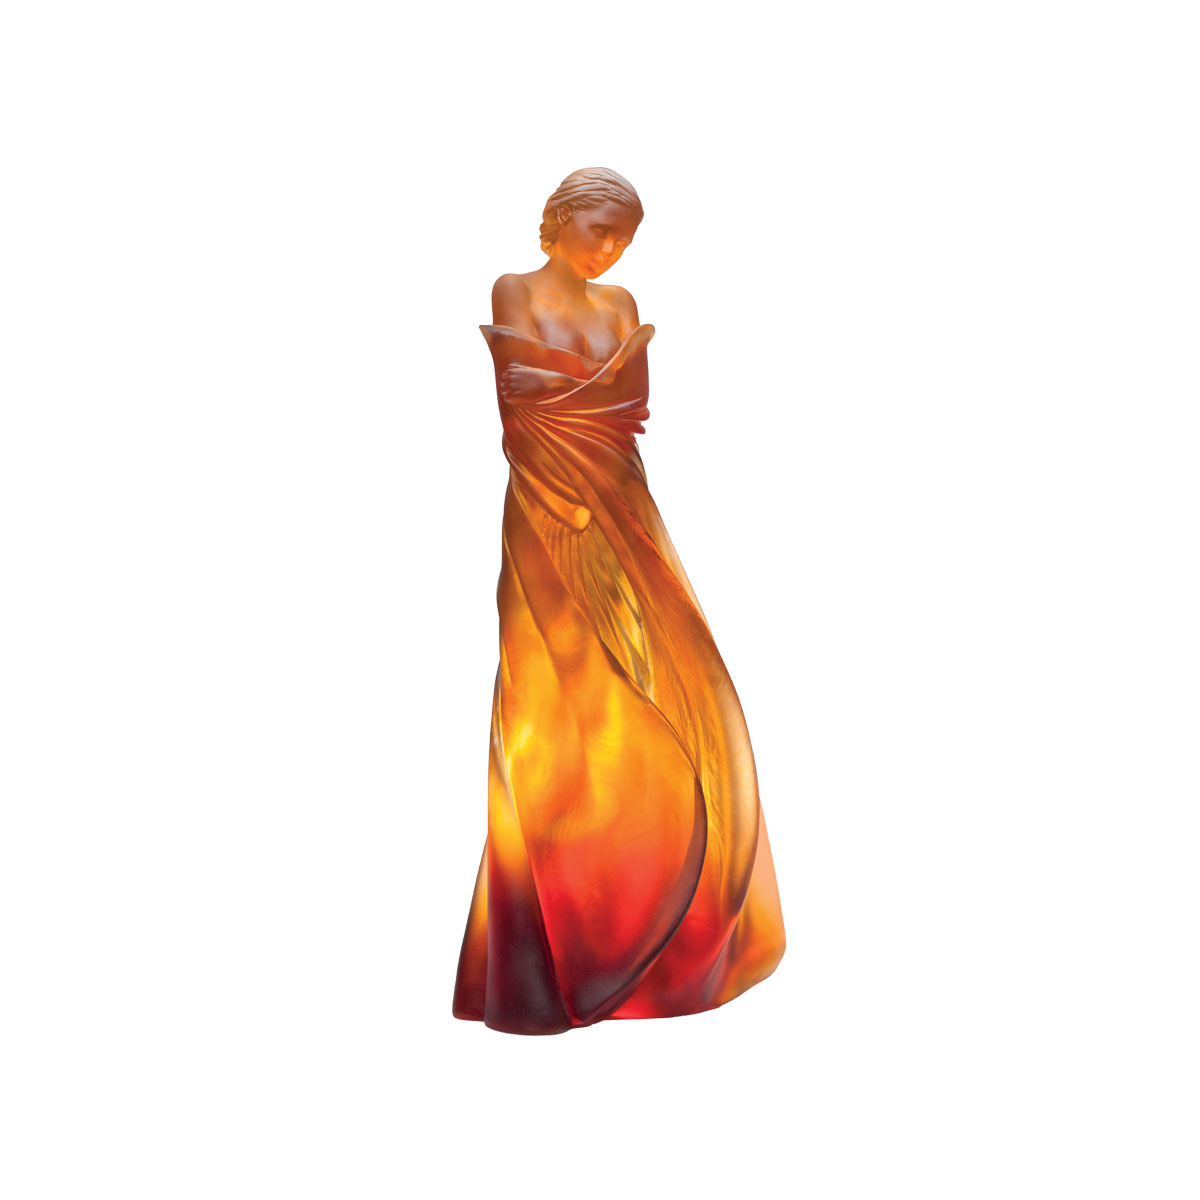 Daum L'Hiver en Soi in Amber by Marie-Paule Deville Chabrolle, Limited Edition Sculpture